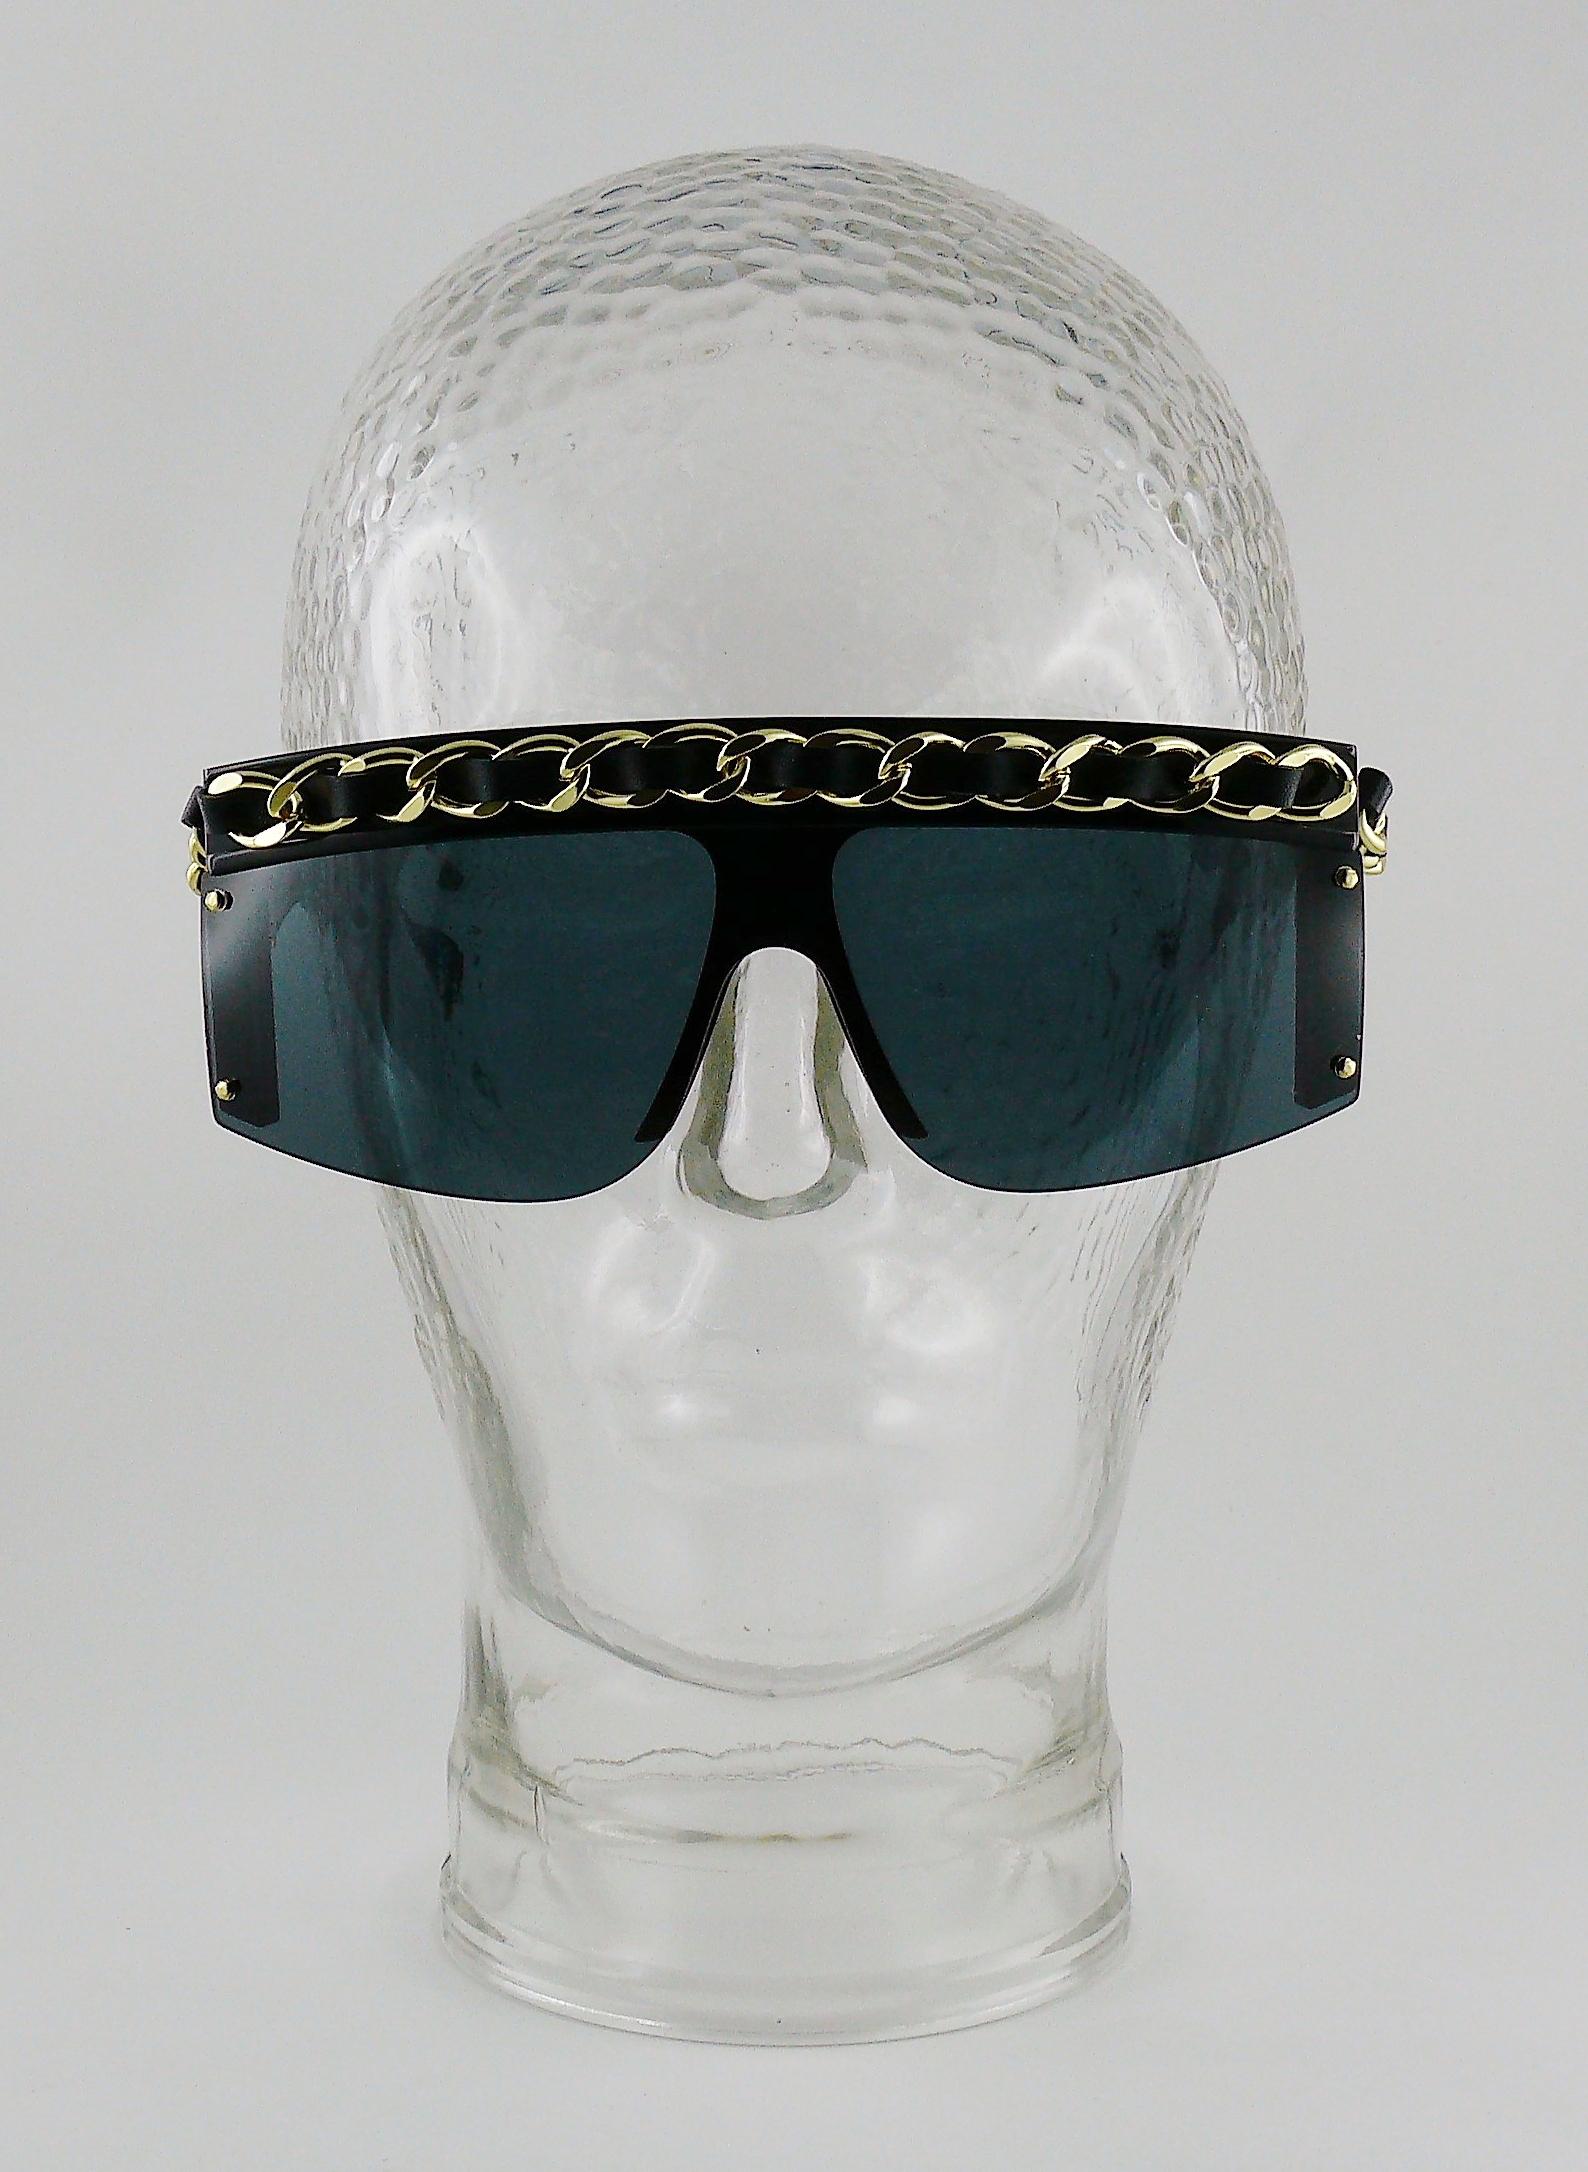 **** WE NO LONGER SHIP SUNGLASSES TO THE USA ****

CHANEL vintage black sunglasses featuring iconic leather and chain accross the frame and temples.

As seen on LADY GAGA.

Marked CHANEL Made in Italy 0026 90.

Indicative measurements : width